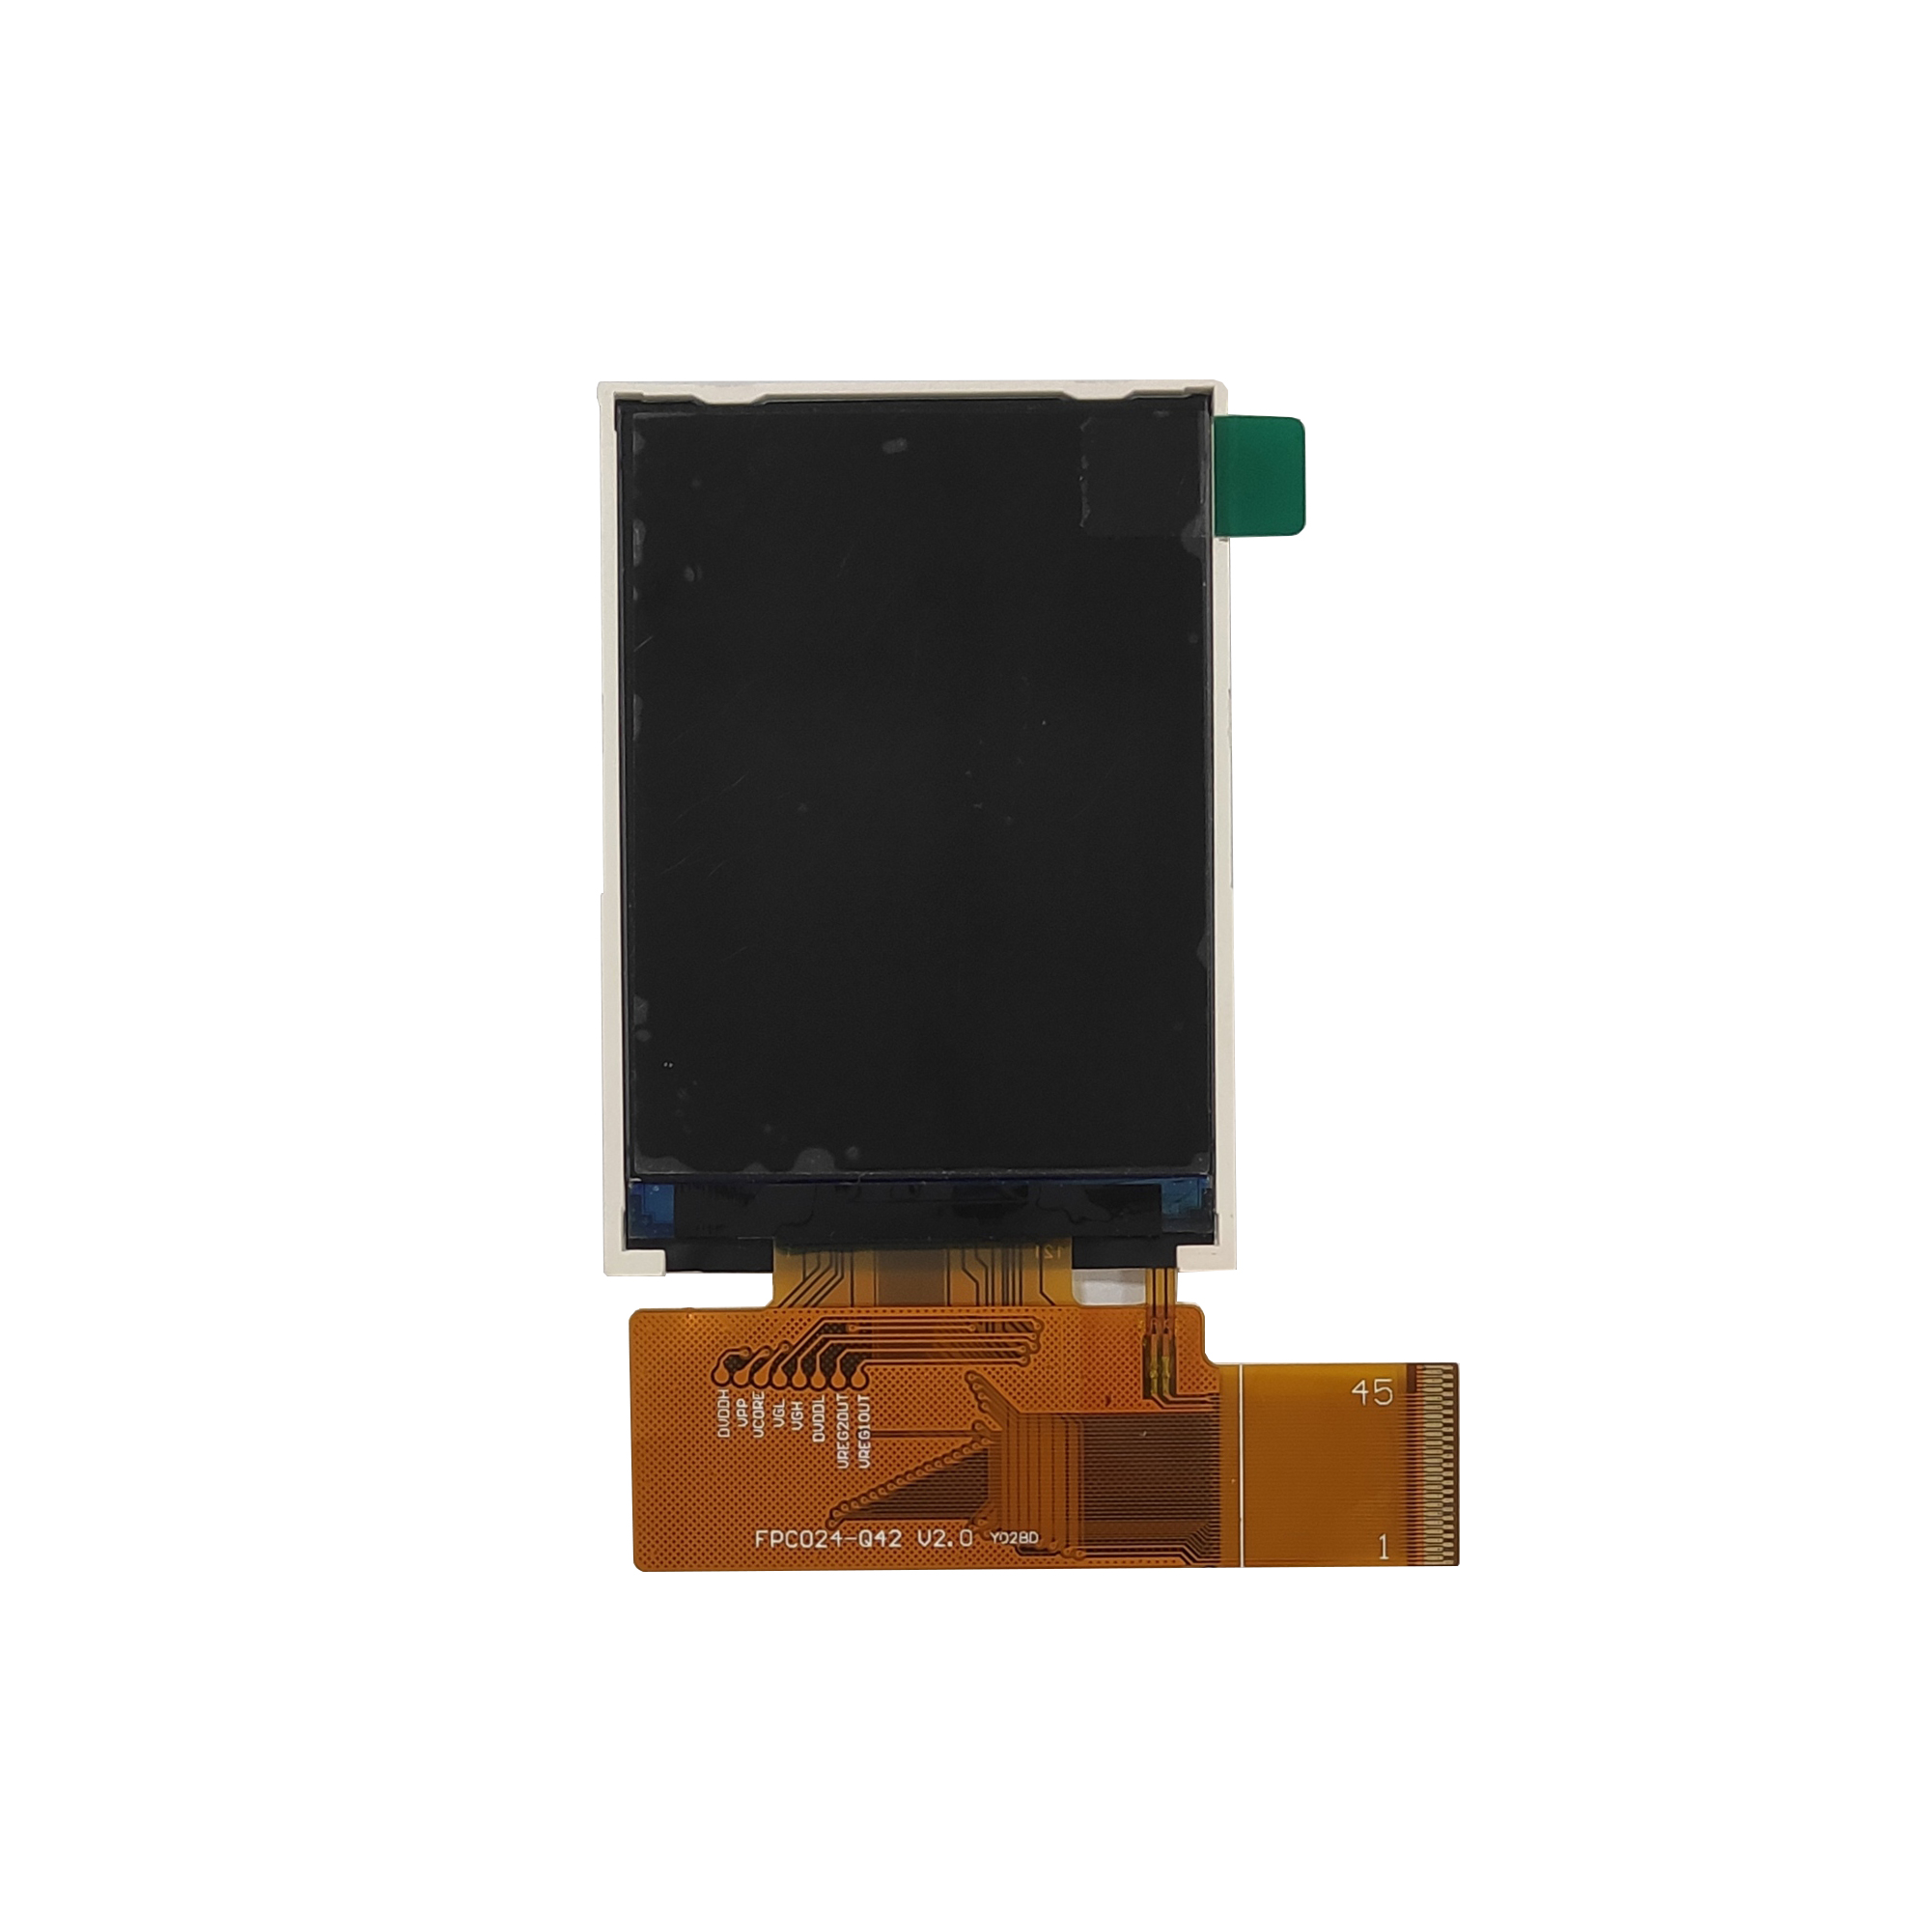 2.4 inch 240*320 IPS TFT LCD display with high brightness 850nits